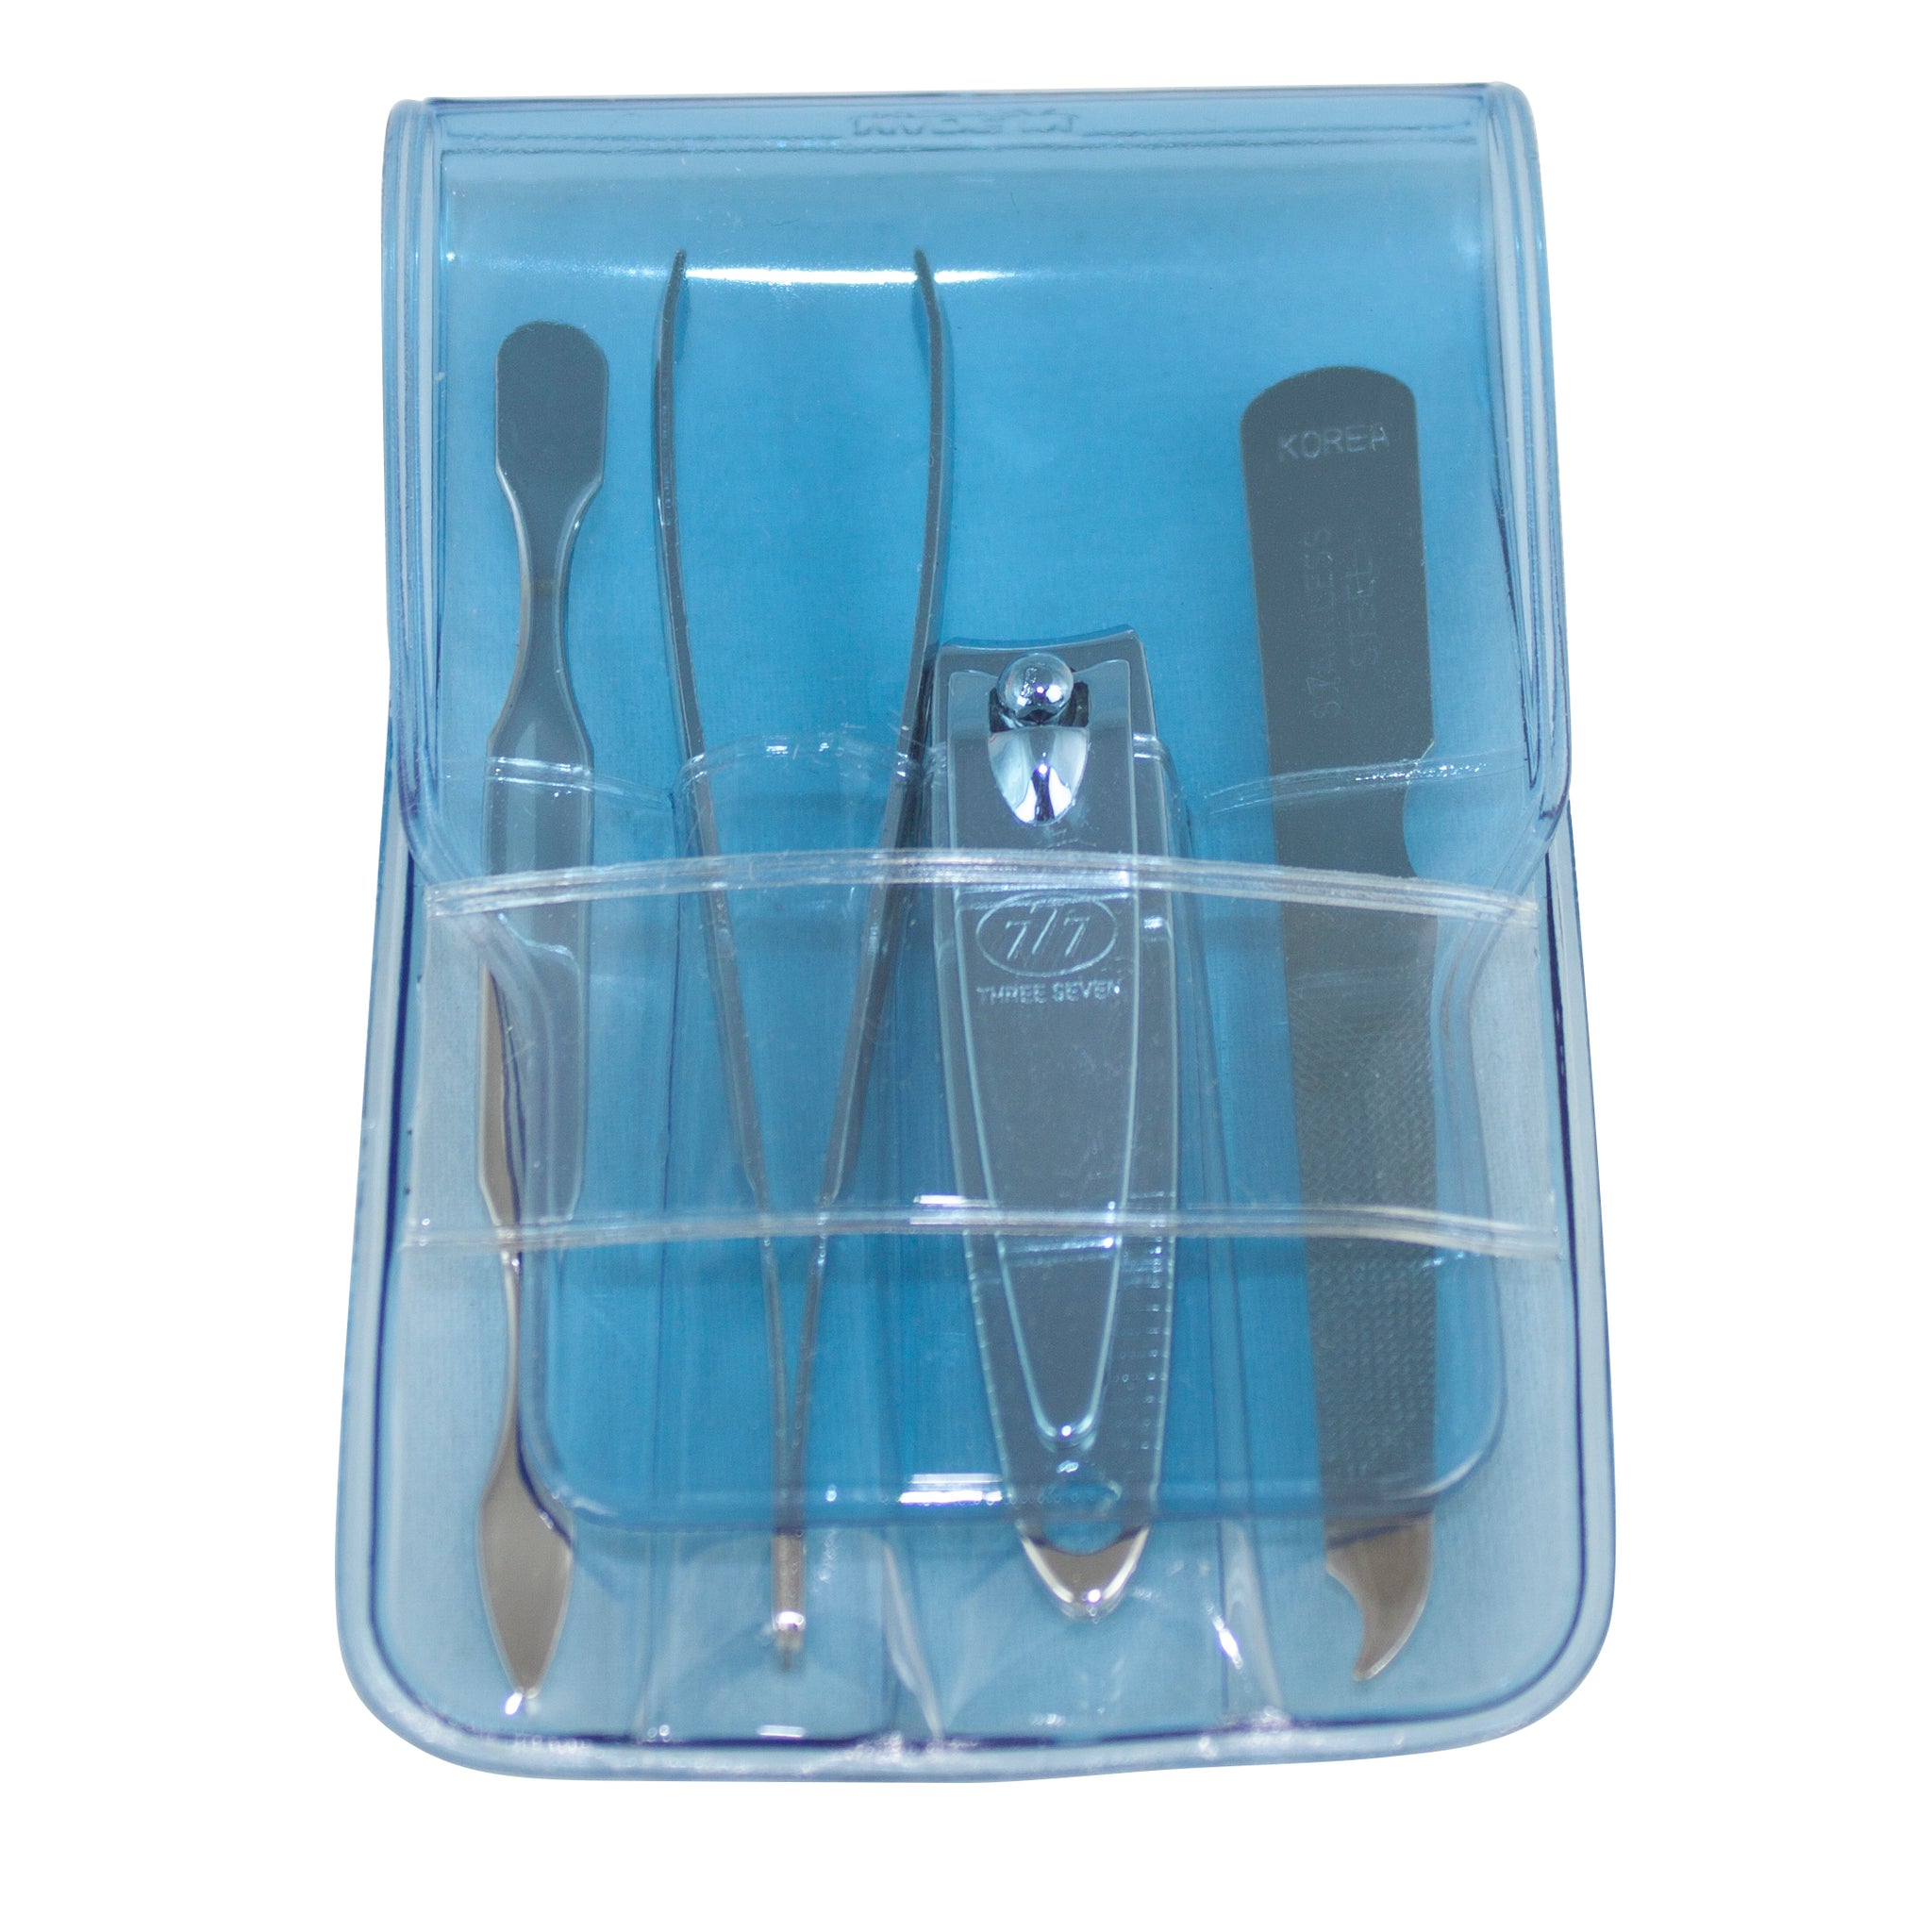 Three Seven, Nail Clipper Set 4pcs DS-84, MADE IN KOREA (Blue), Free shipping (Excluding HI, AK)